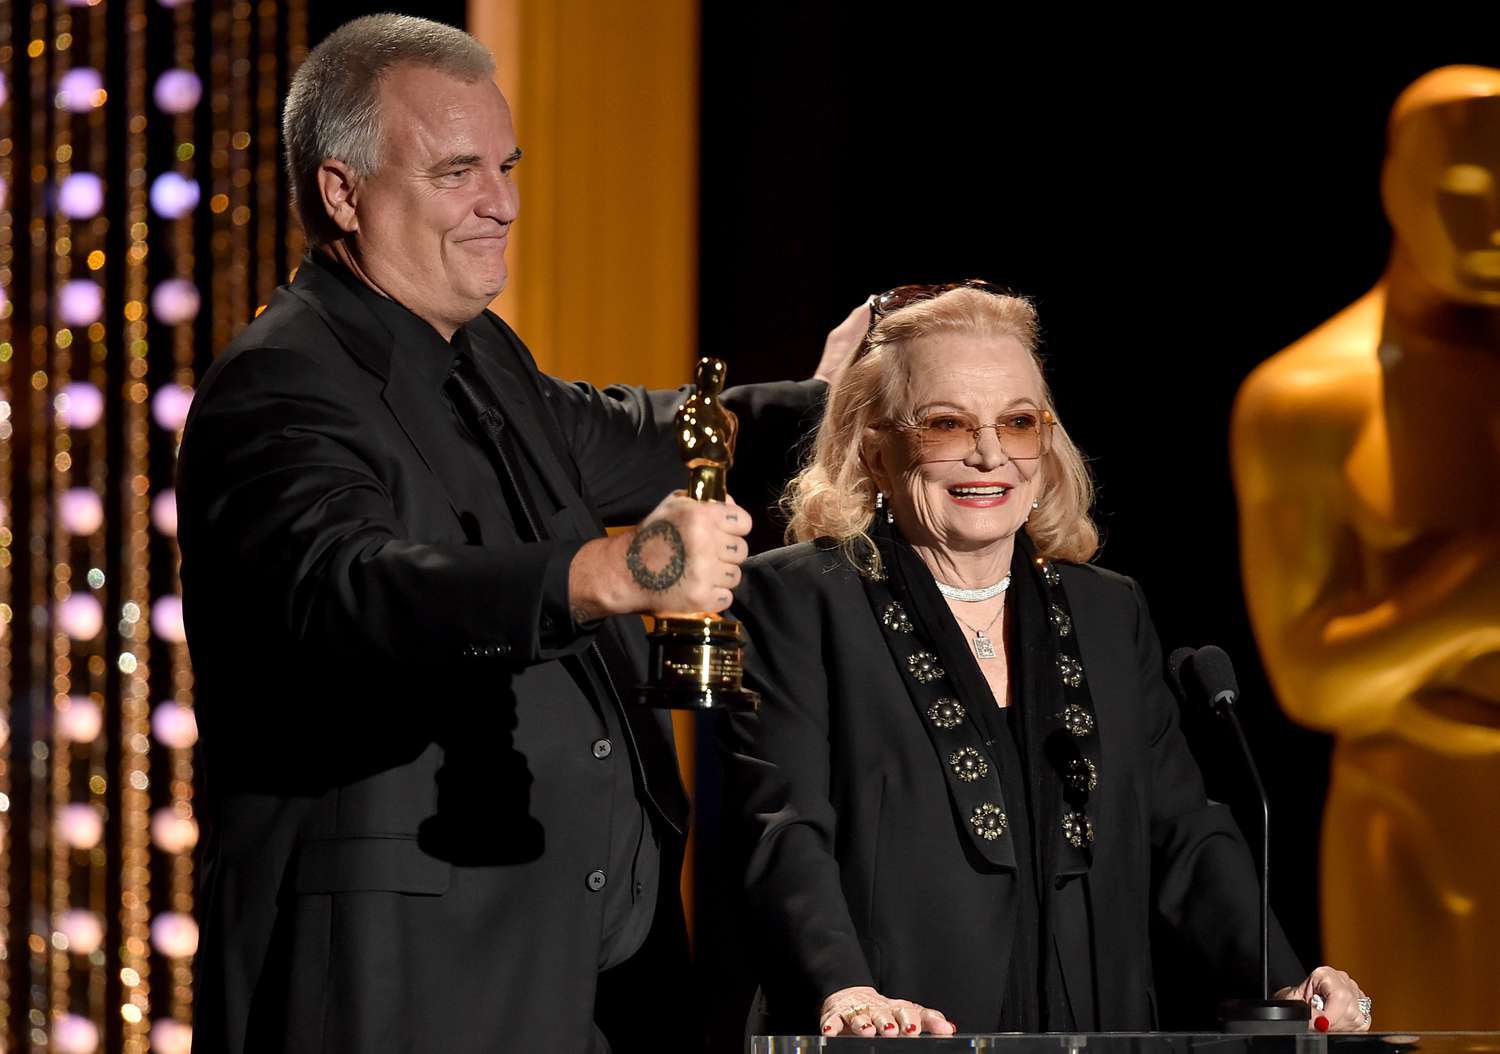 Actress Gena Rowlands (R) accepts an award from Nick Cassavetes onstage during the Academy of Motion Picture Arts and Sciences' 7th annual Governors Awards at The Ray Dolby Ballroom at Hollywood & Highland Center on November 14, 2015 in Hollywood, California.